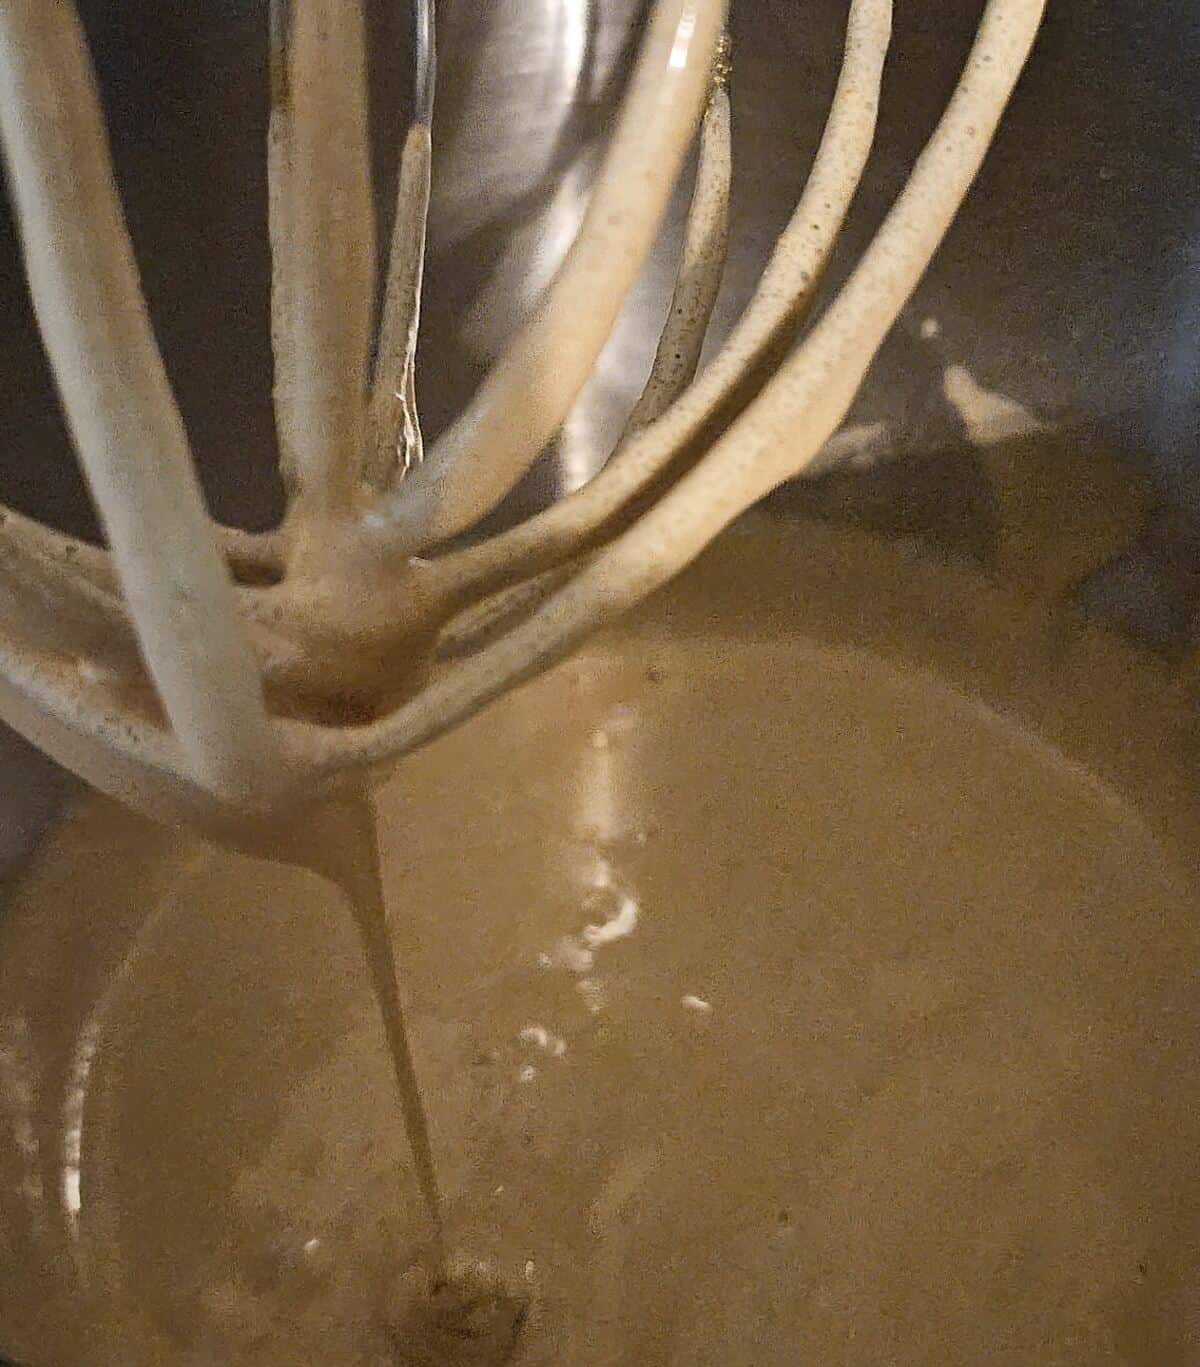 liquid batter dripping from the whip attachment of a stand mixer into a steel bowl